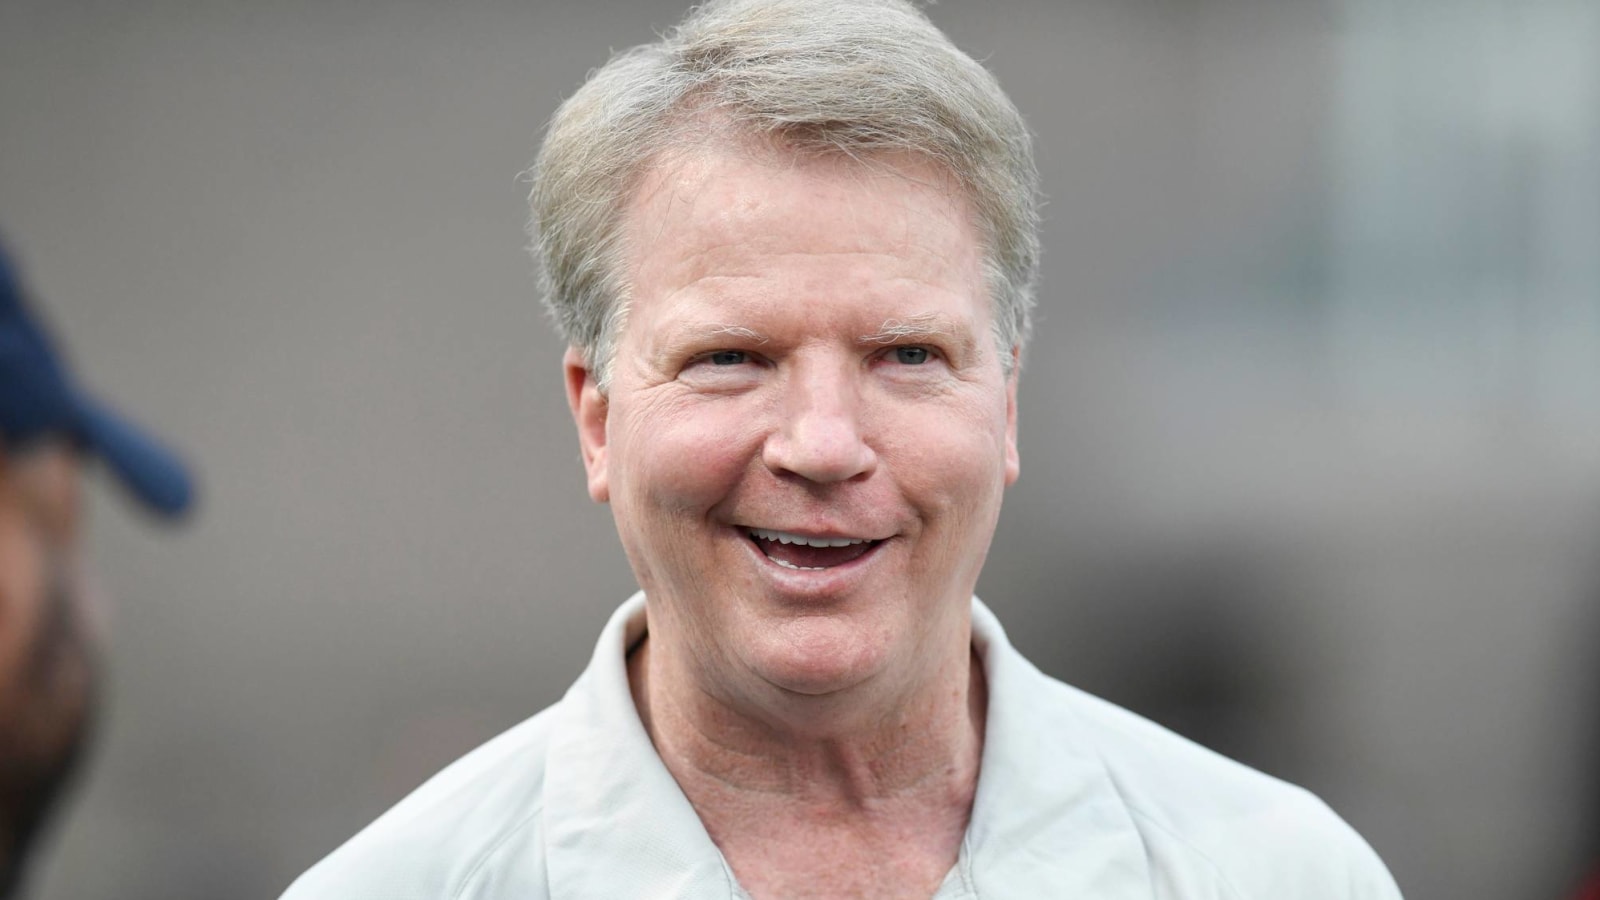 Phil Simms shares great story about late Dan Reeves